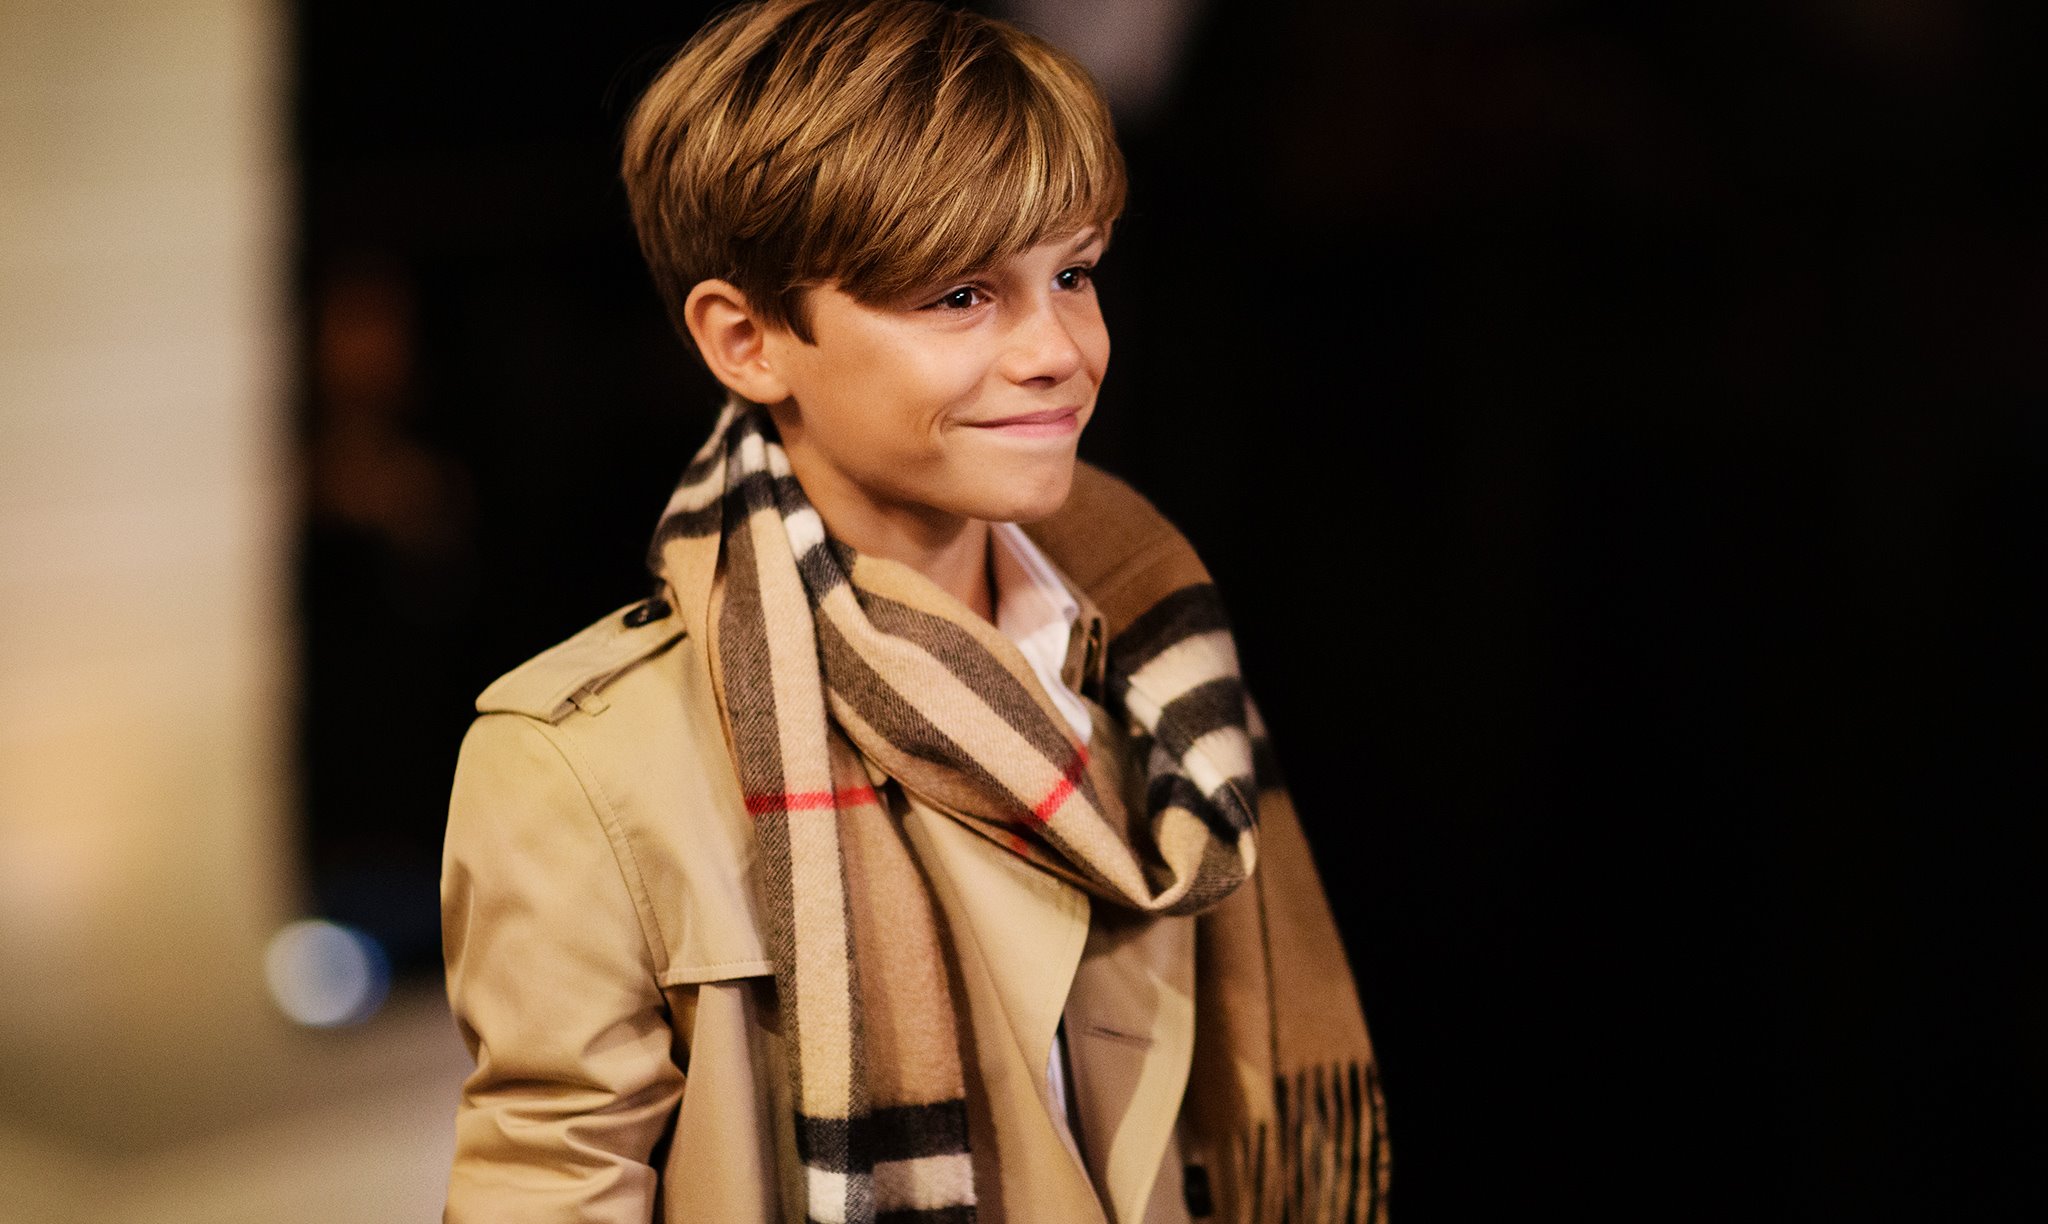 Romeo Beckham Pictures To Pin On Pinterest - Long Boys Haircuts - HD Wallpaper 